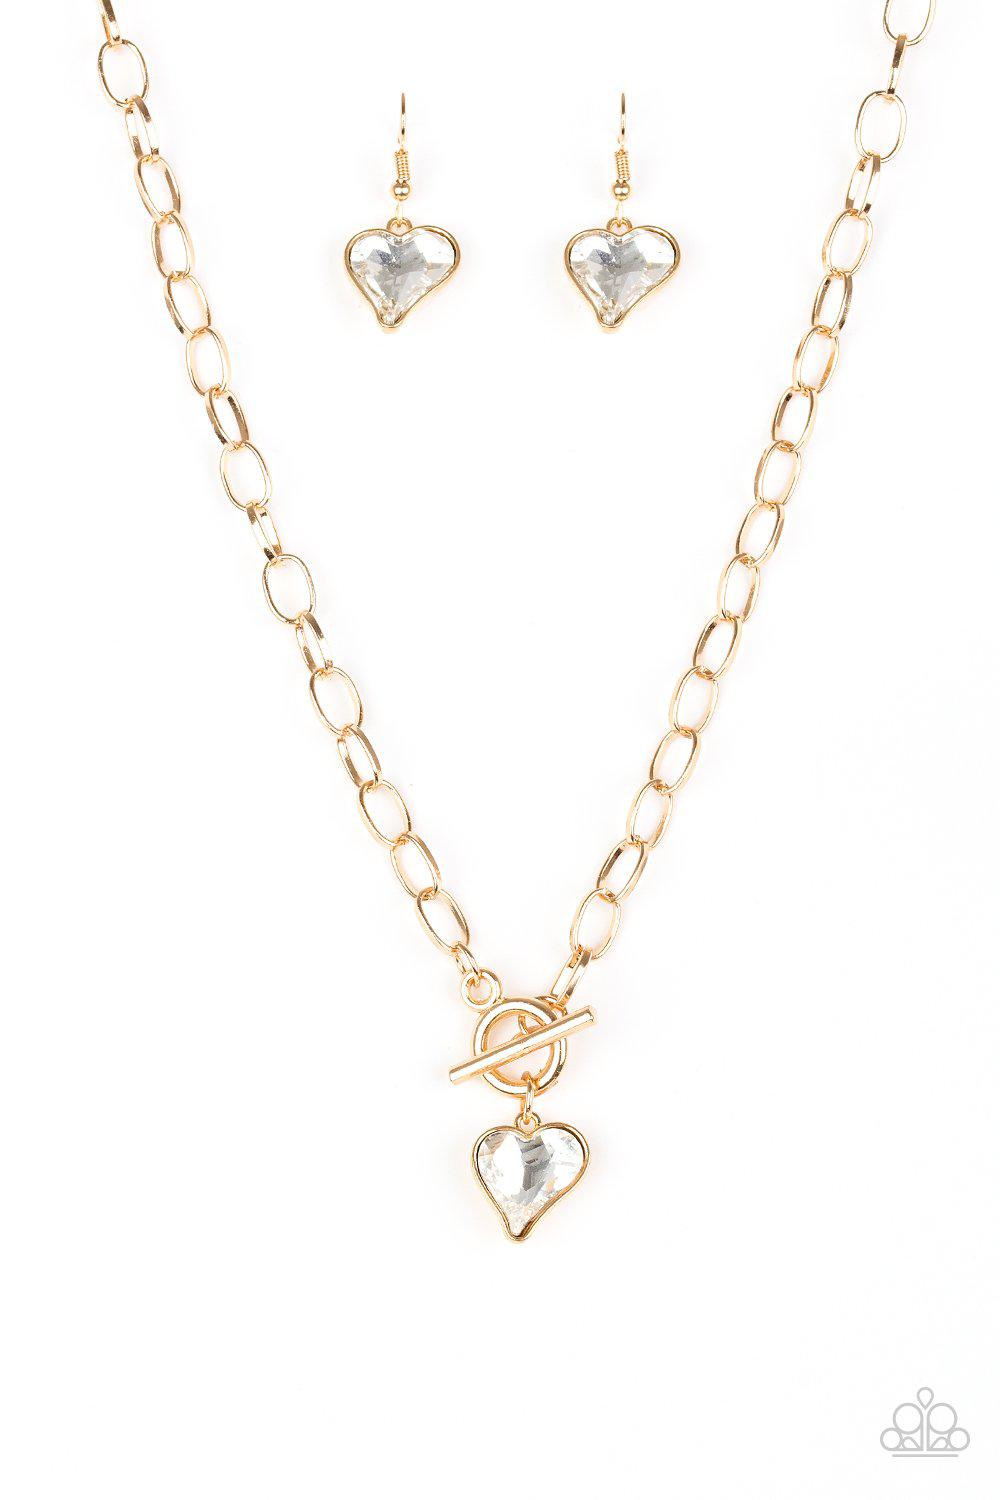 Princeton Princess Gold and White Rhinestone Heart Toggle Necklace - Paparazzi Accessories - lightbox -CarasShop.com - $5 Jewelry by Cara Jewels